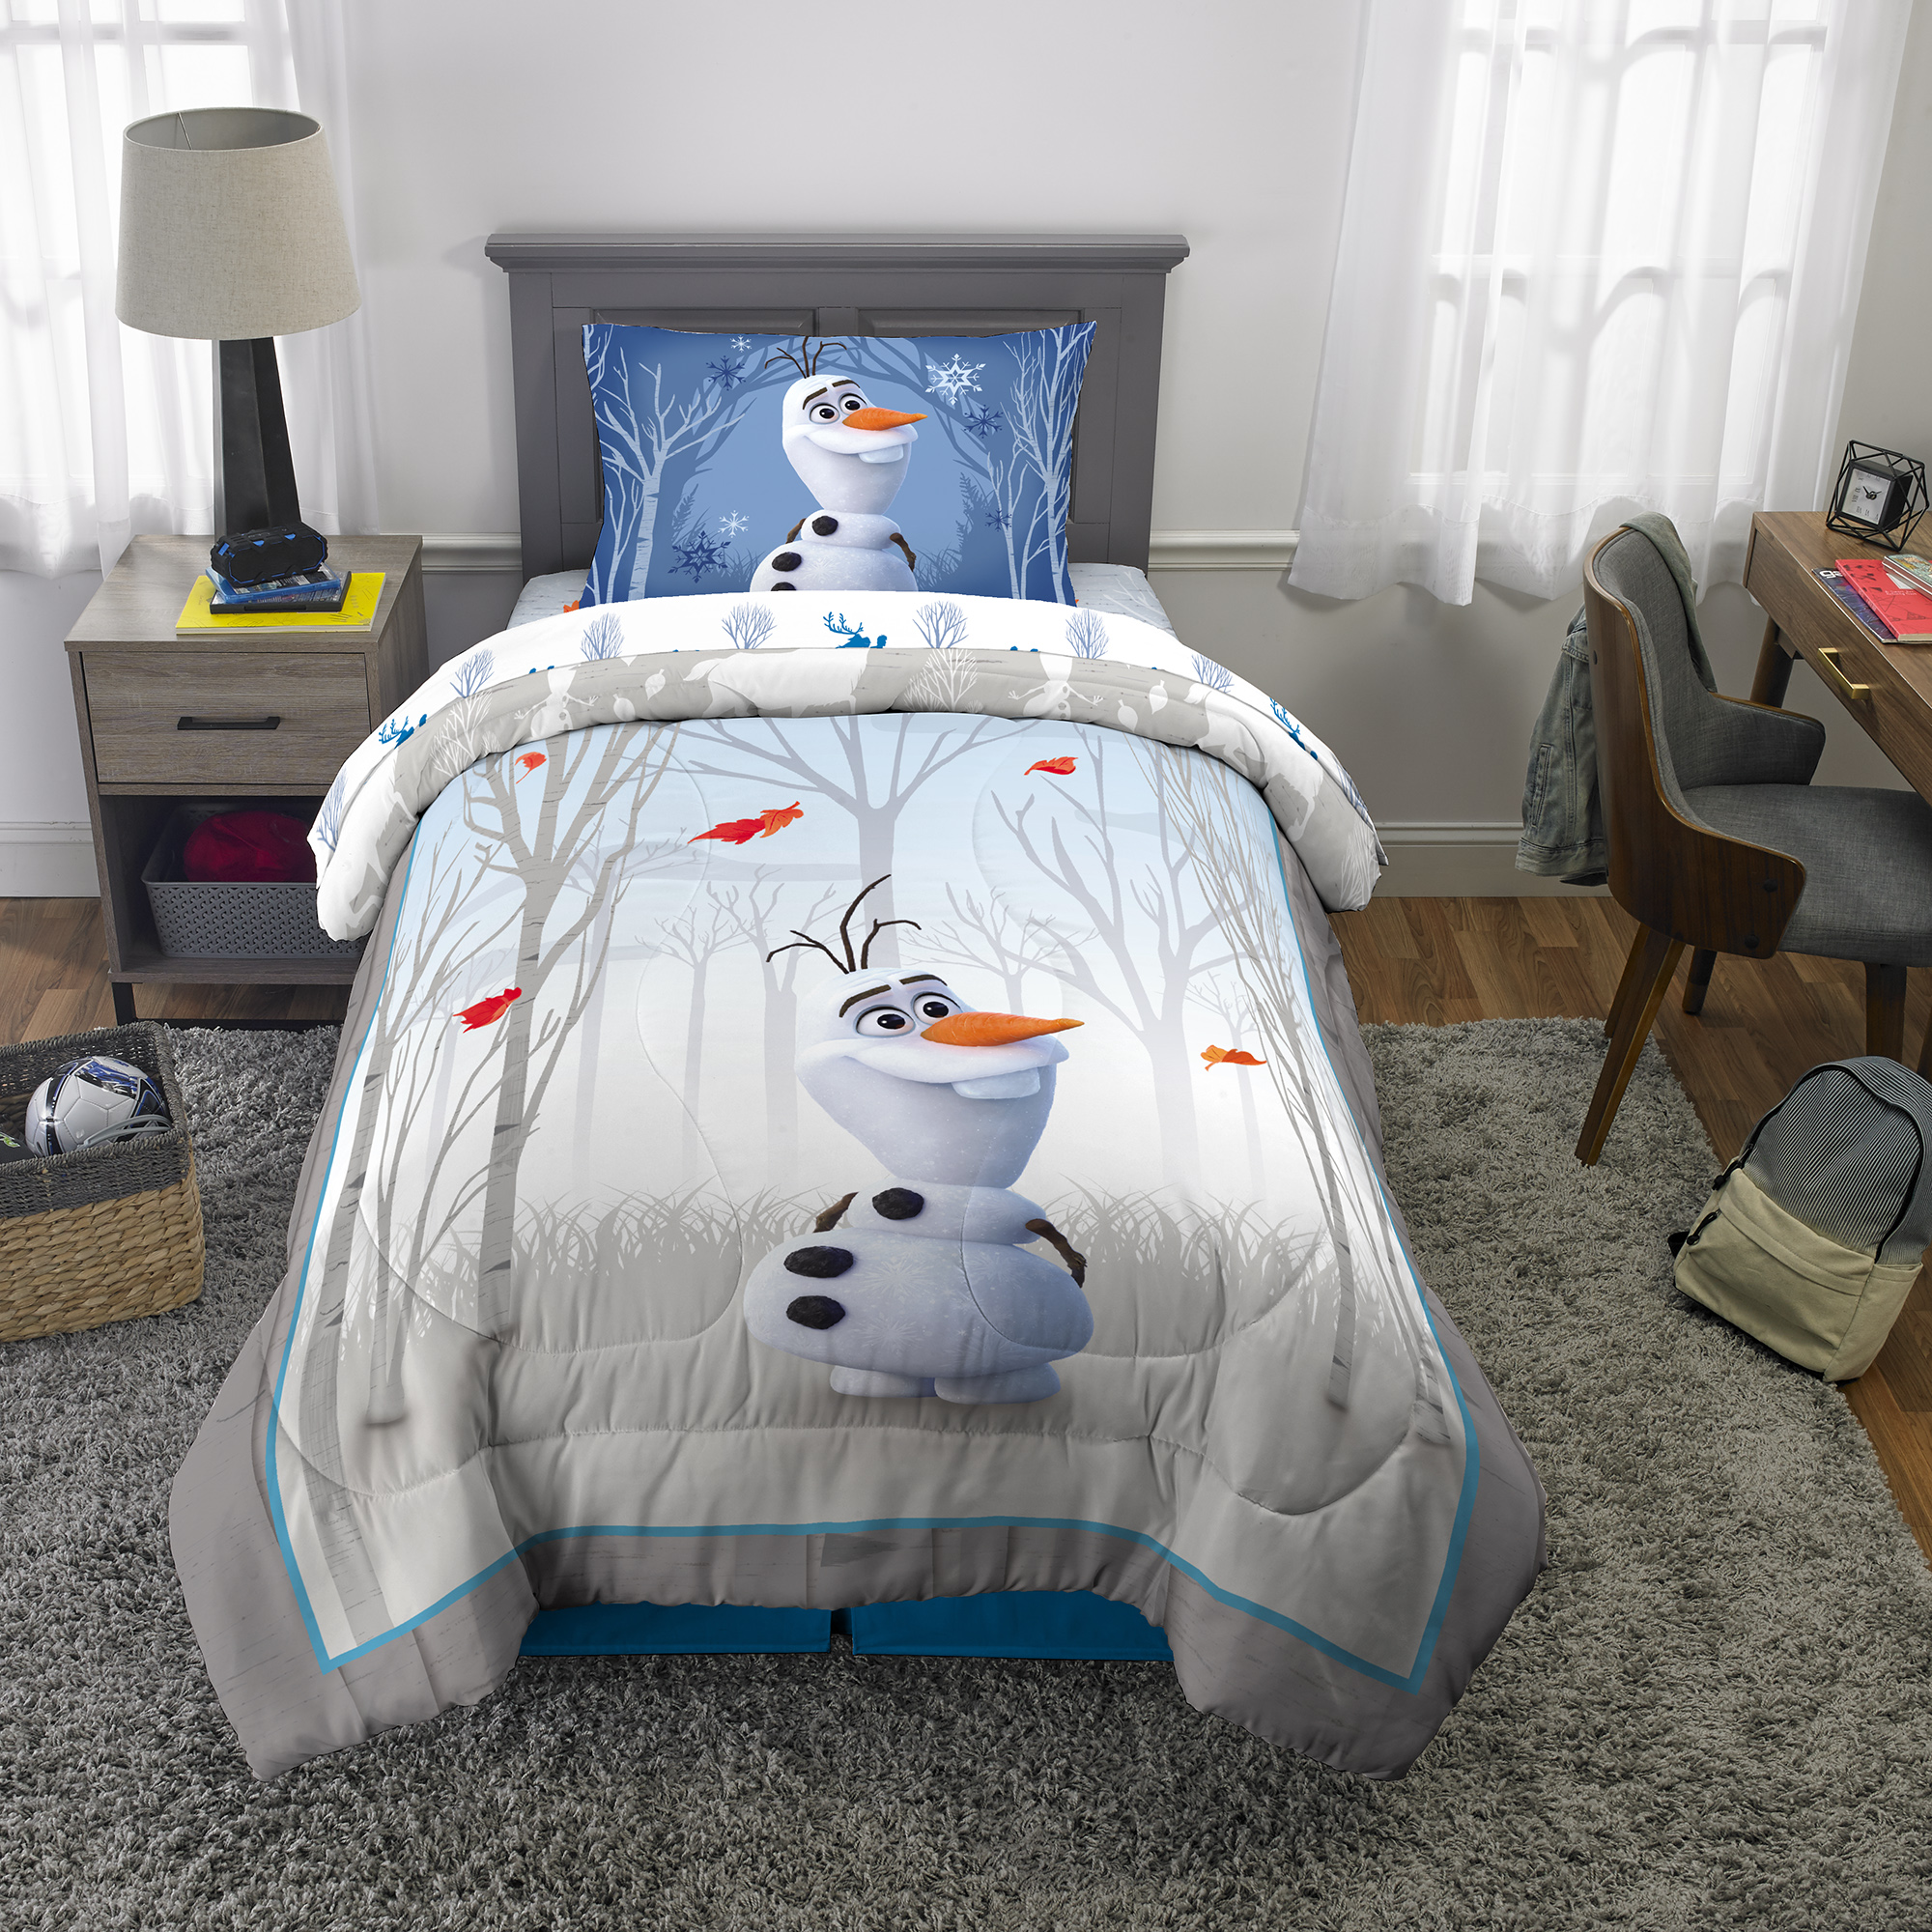 Disney Frozen Olaf Kids Comforter and Sham, 2-Piece Set, Twin/Full, Reversible, Gray - image 2 of 15